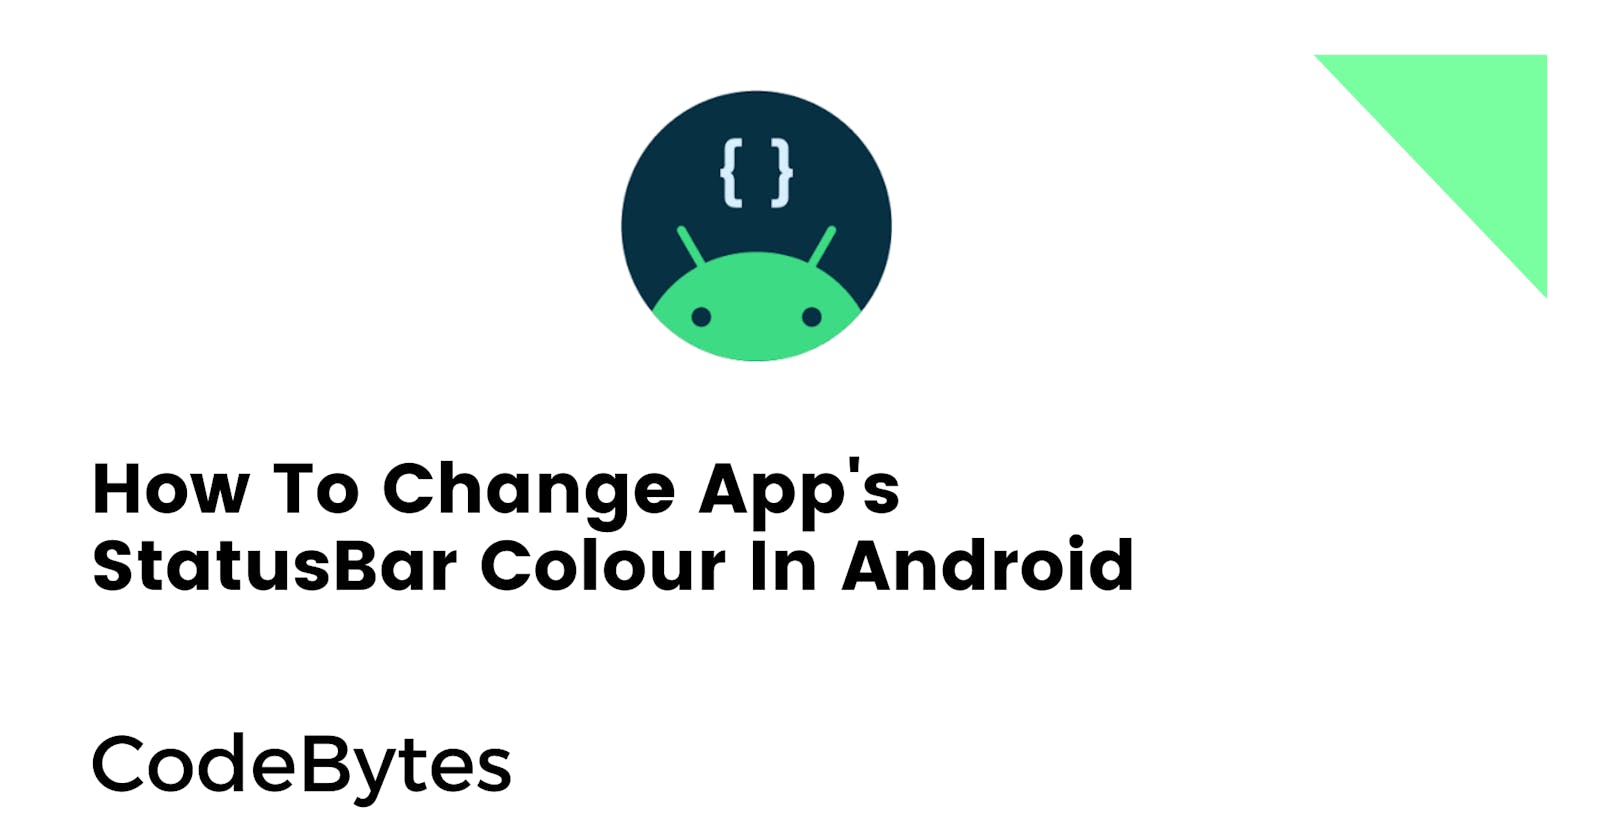 How To Change App's StatusBar Colour In Android